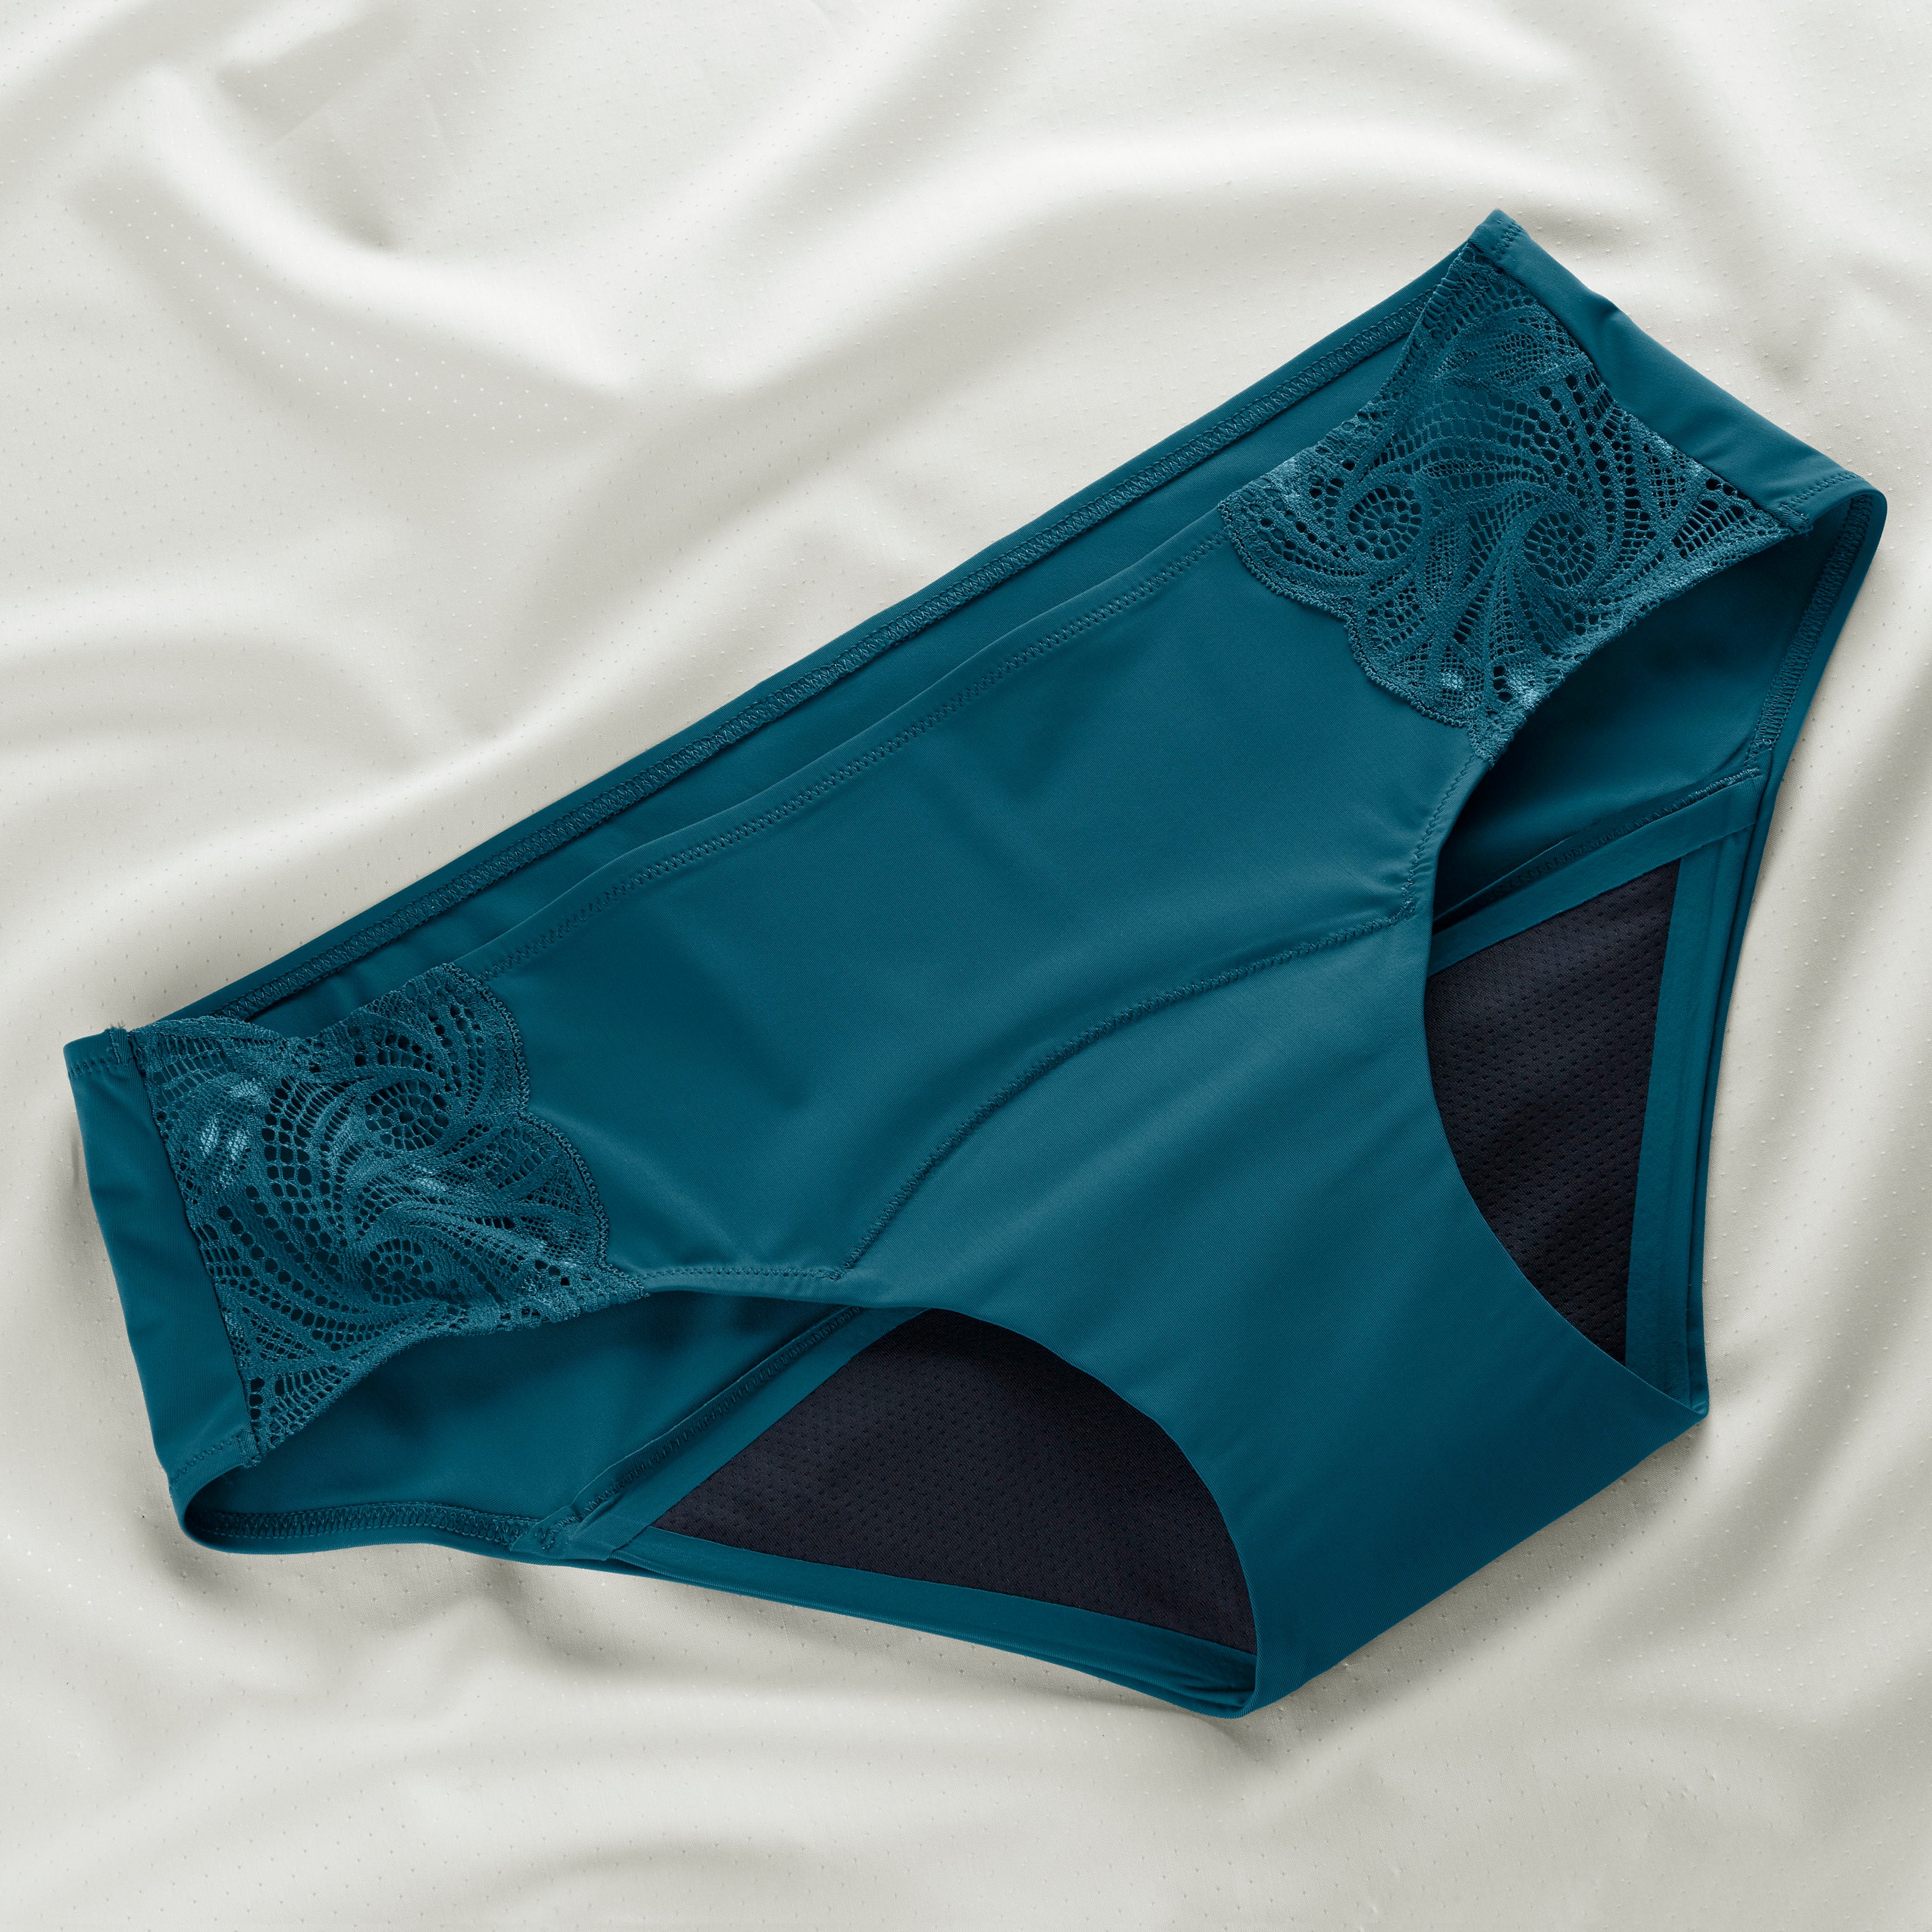 Buy i-activ Period Panty, Disposable, size -31 to 48